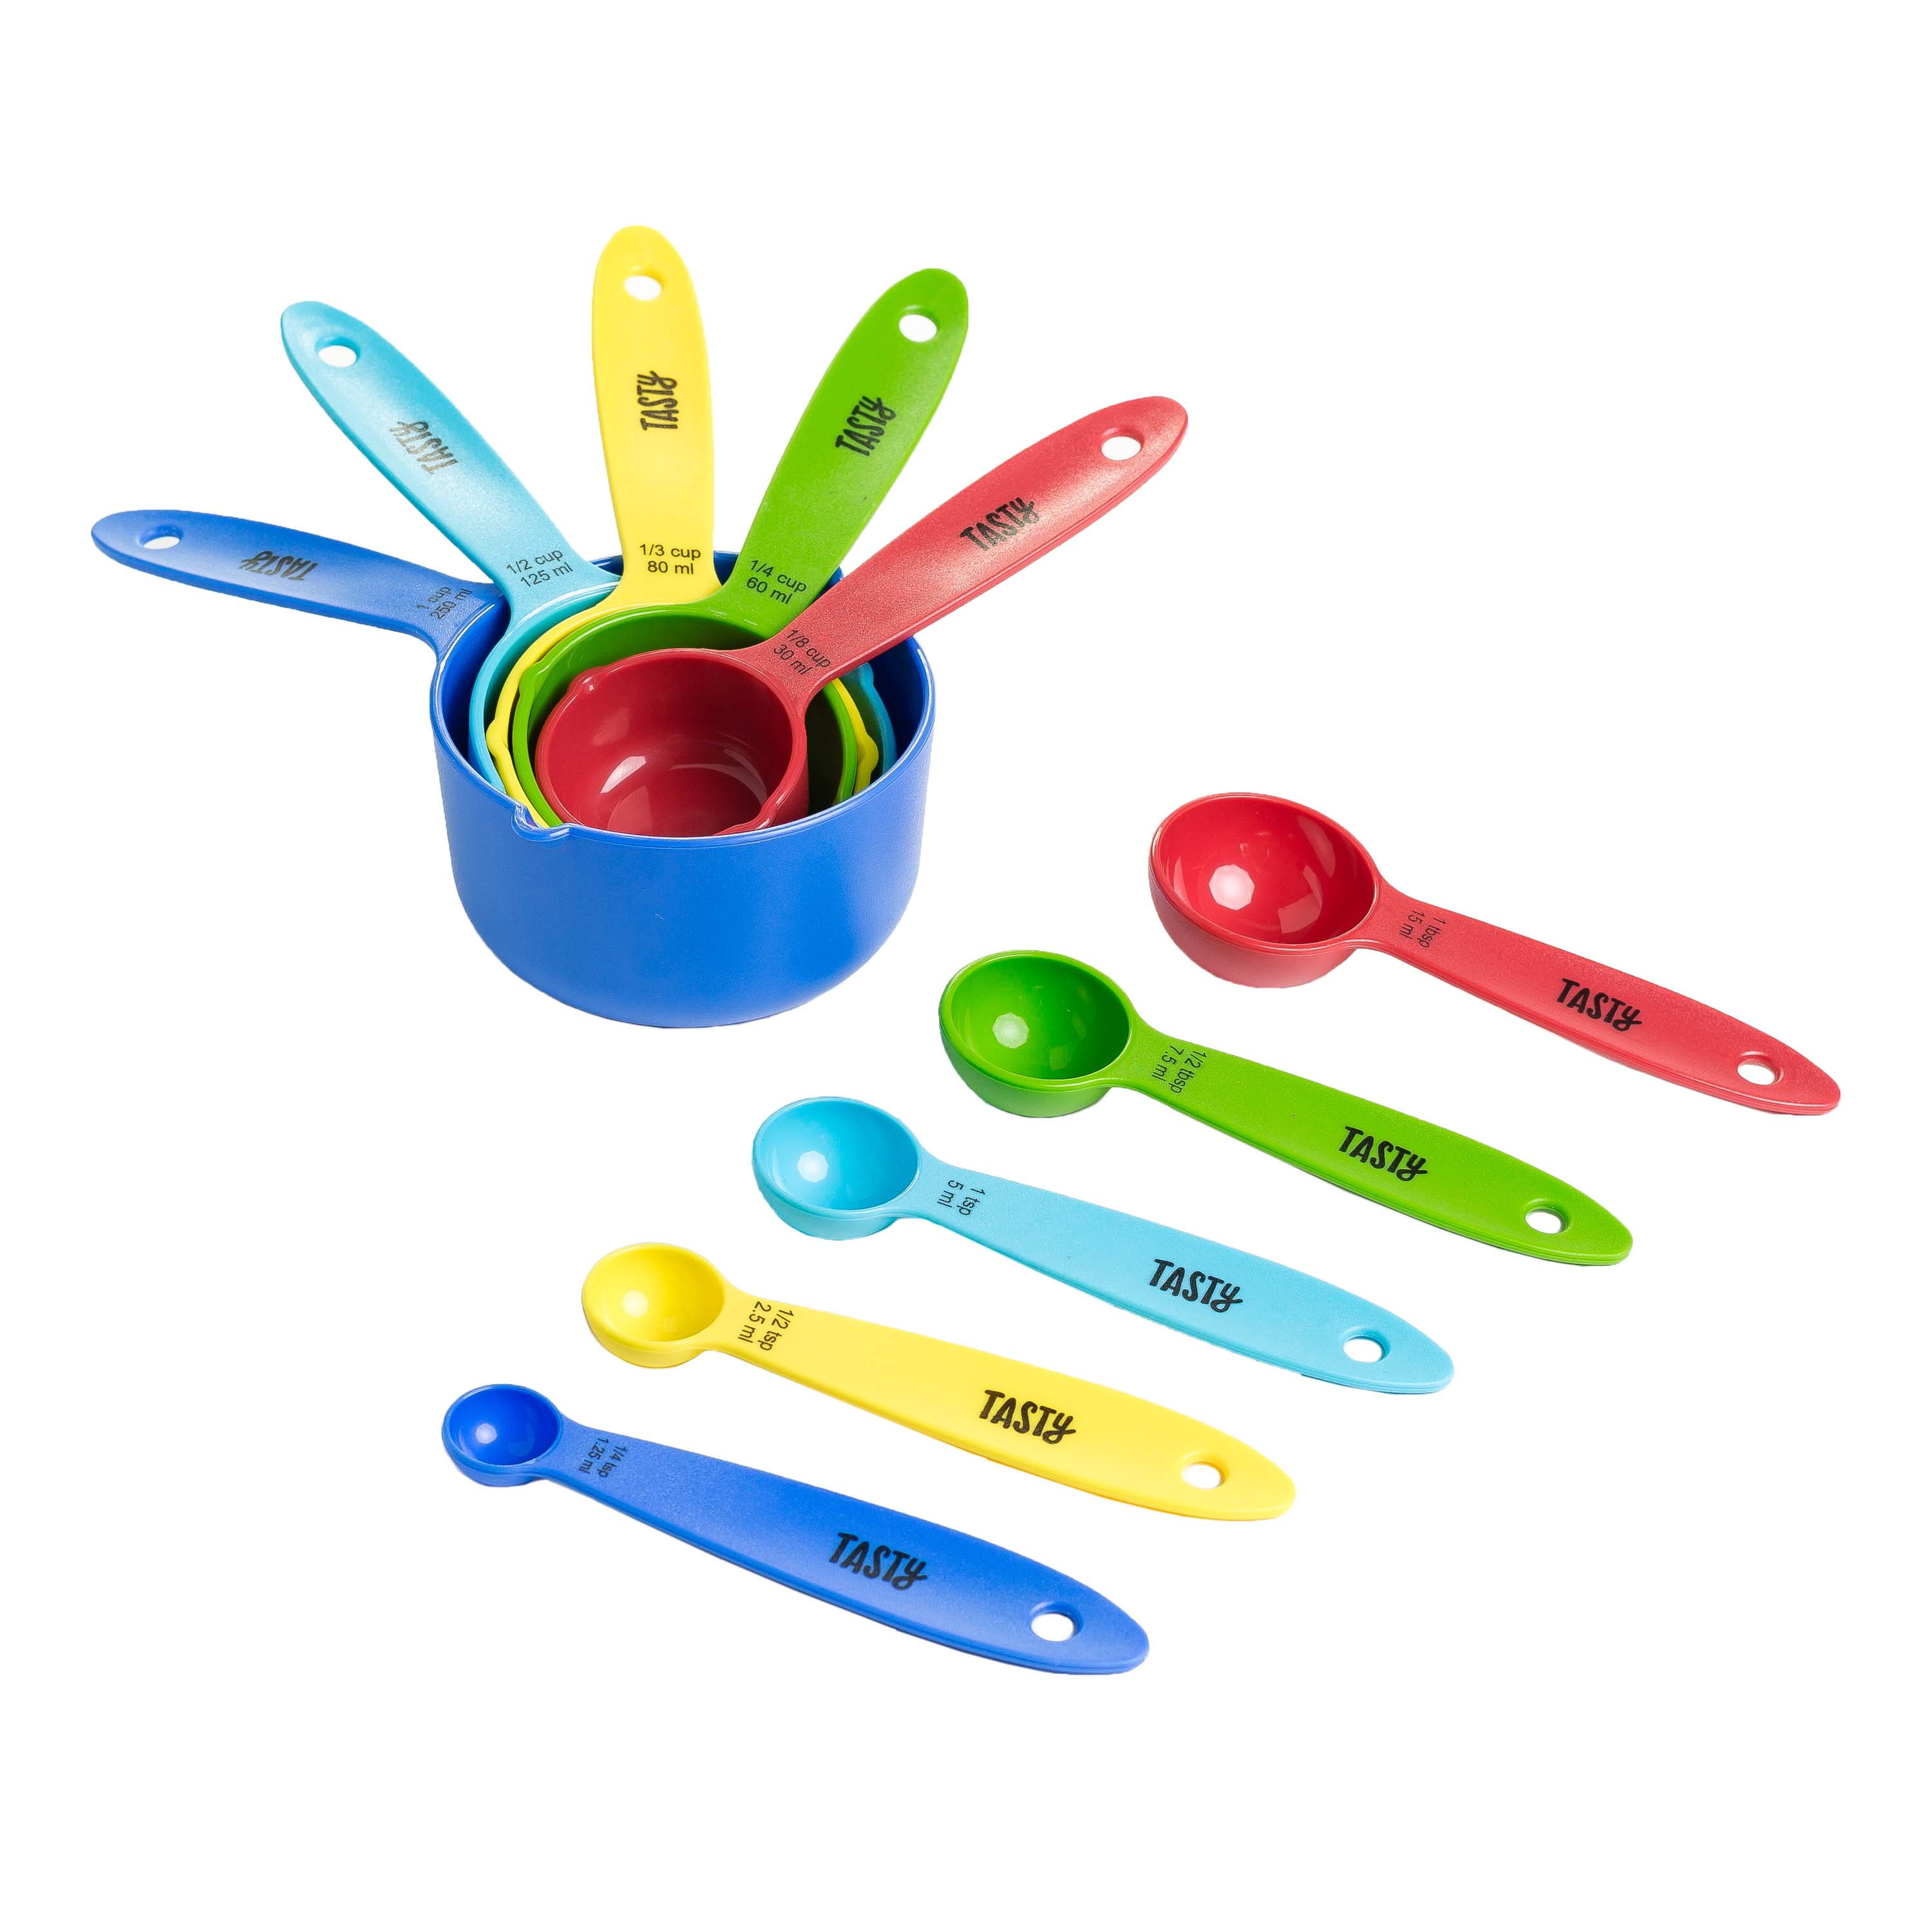  Rainbow Measuring Cups and Spoons Set, Stainless Steel 10 Piece  Set, Stackable 5 Measuring Cups and 5 Measuring Spoons with 2 Rings,  Titanium Colorful Plated, Iridescent and Multi-colored: Home & Kitchen